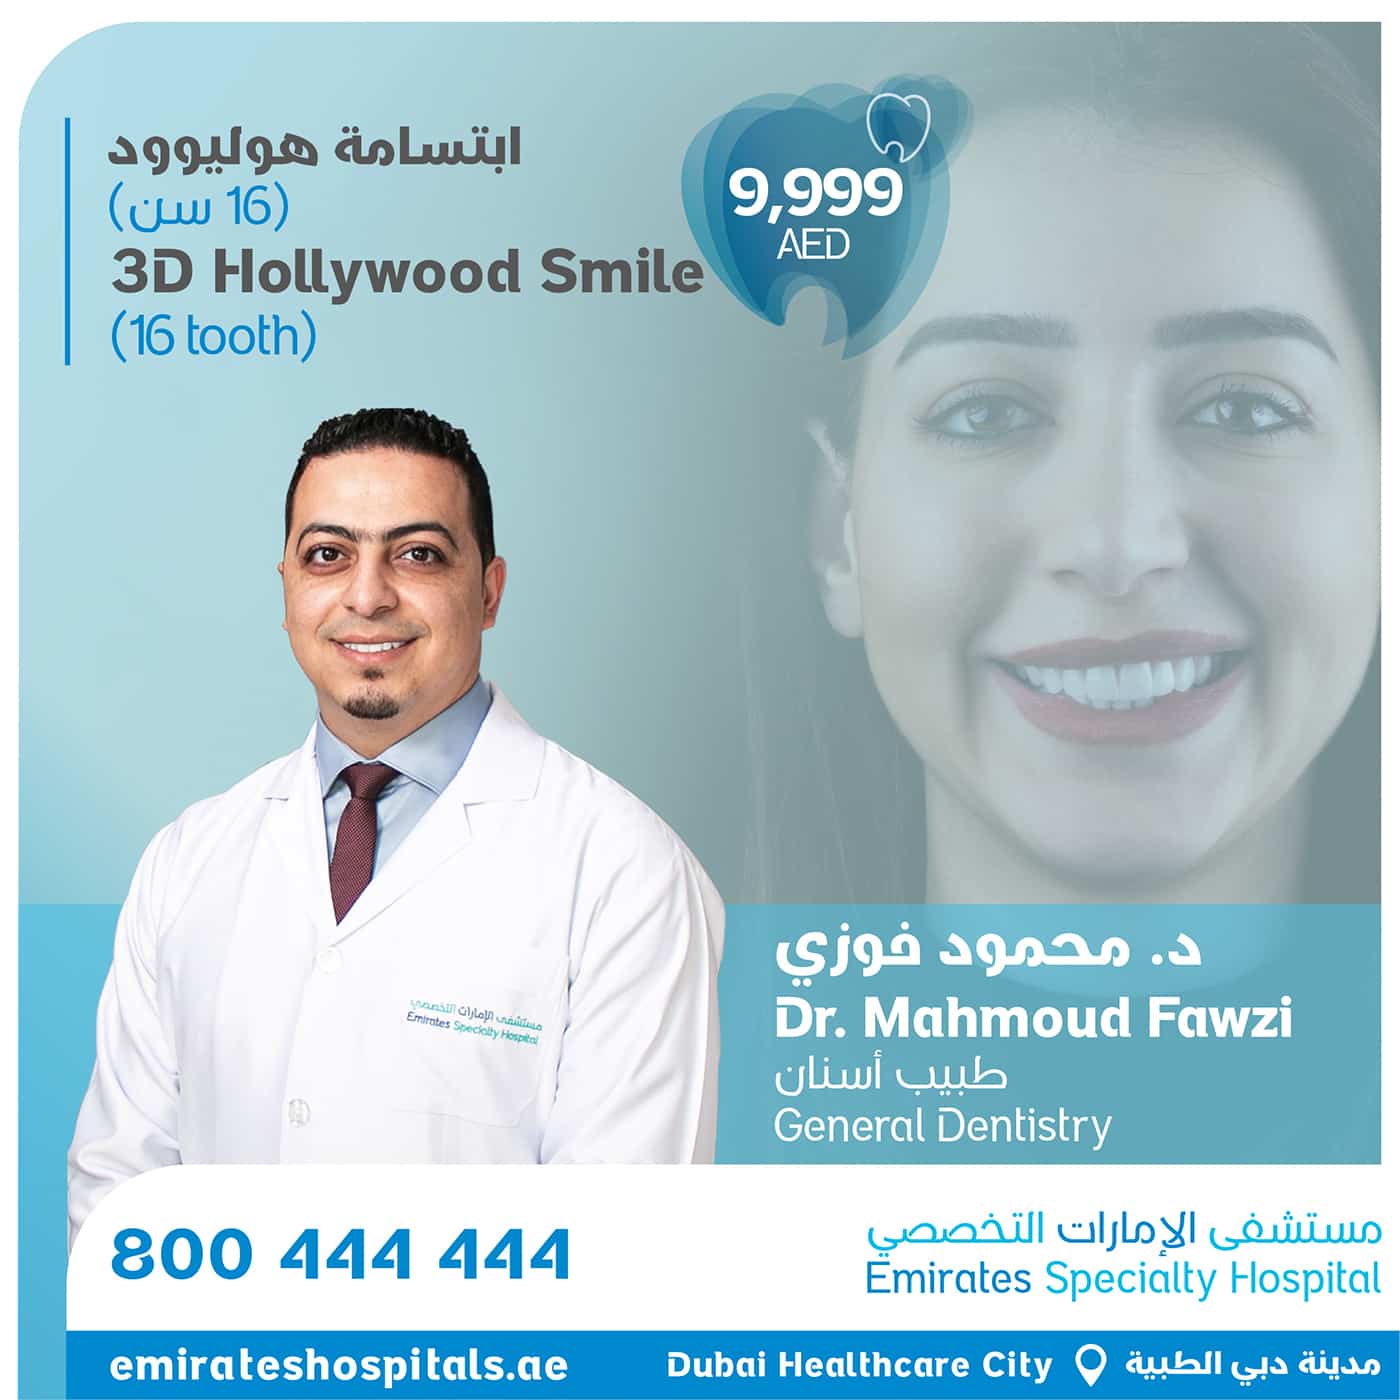 3D Hollywood Smile Offer, Emirates Specialty Hospital DHCC